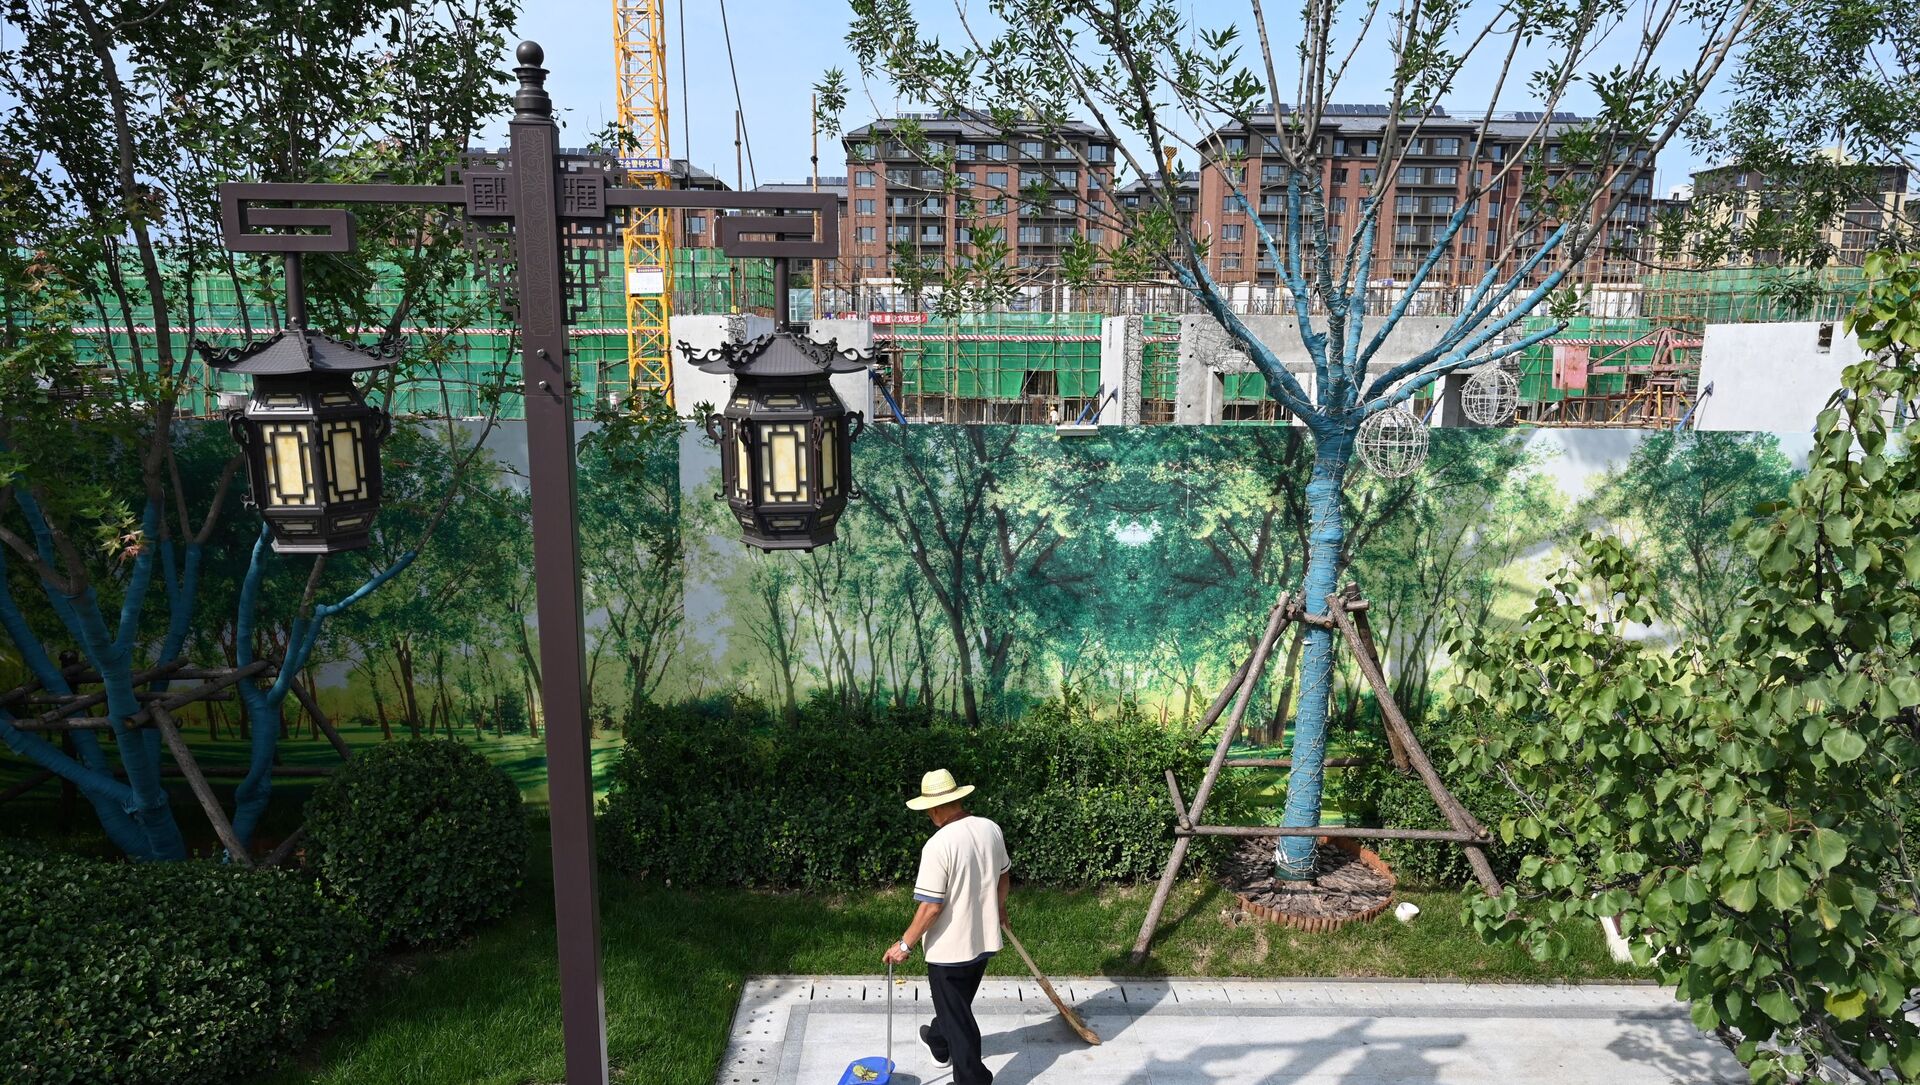 A worker cleans a display area next to the construction site of an Evergrande housing complex in Beijing on September 13, 2021 - 俄羅斯衛星通訊社, 1920, 08.10.2021